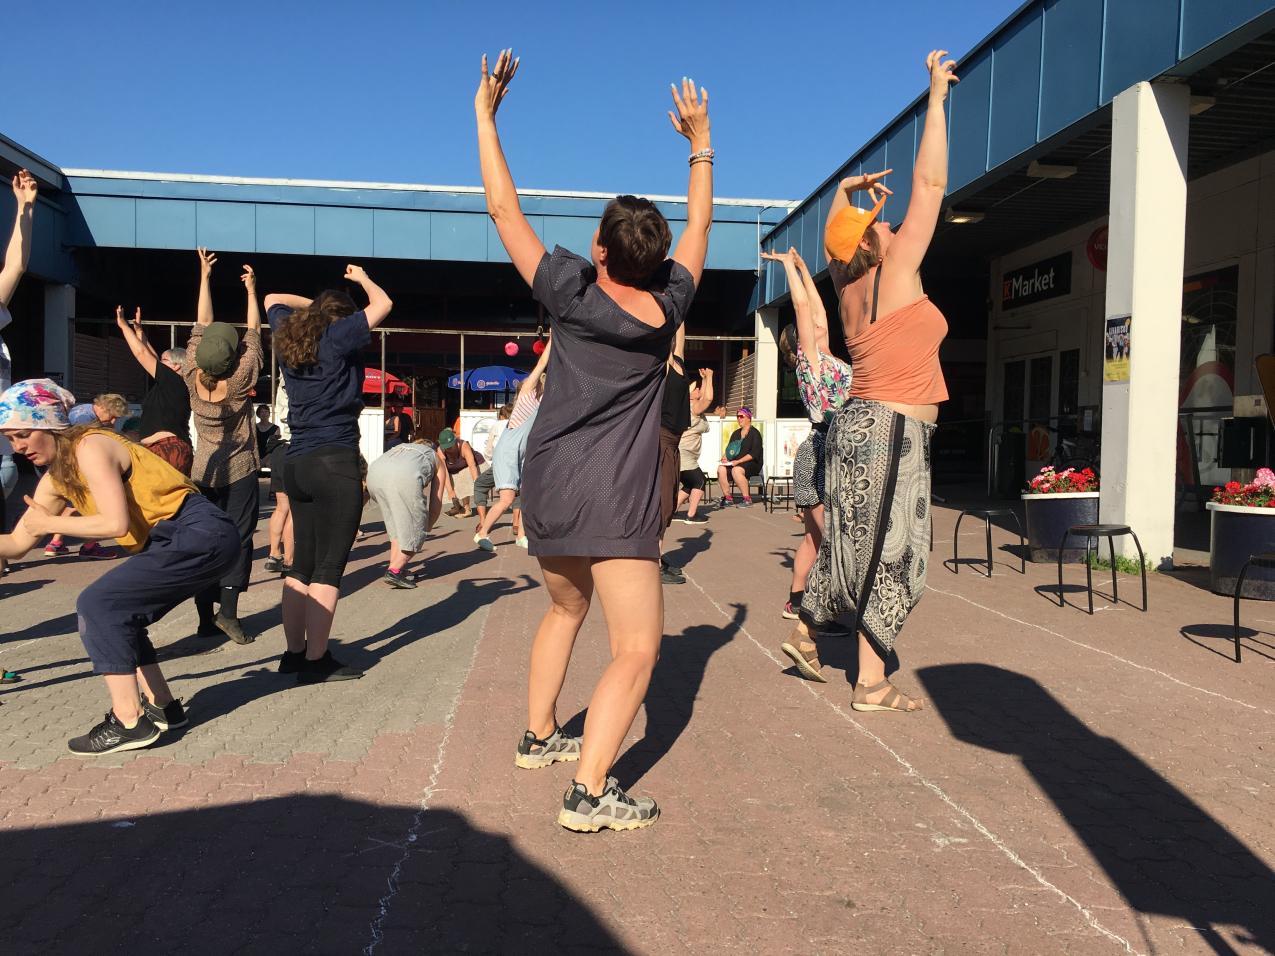 A group of people dancing outside in the summertime.